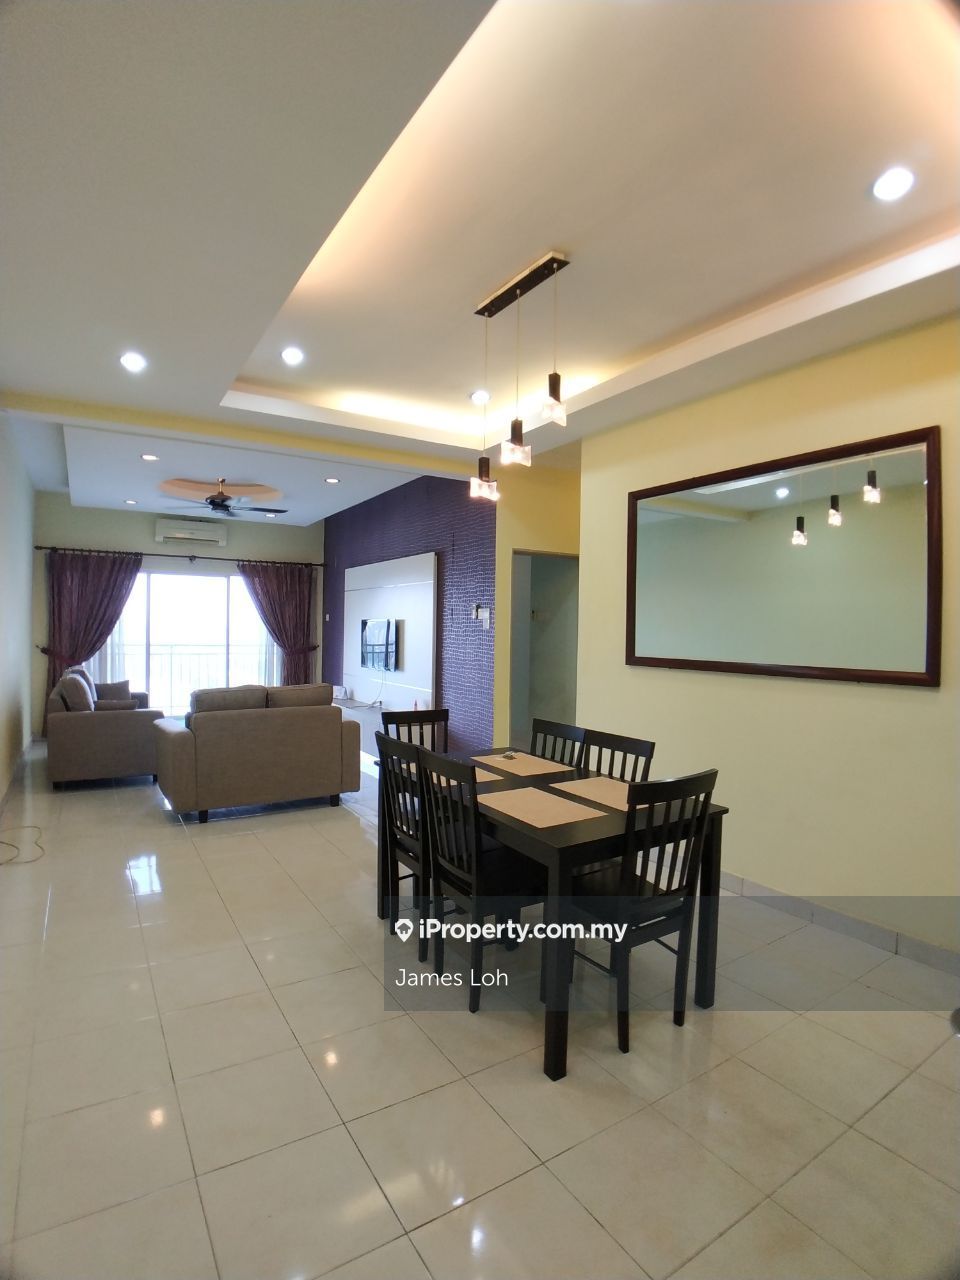 Move in condition with fully furnished, near to KTM